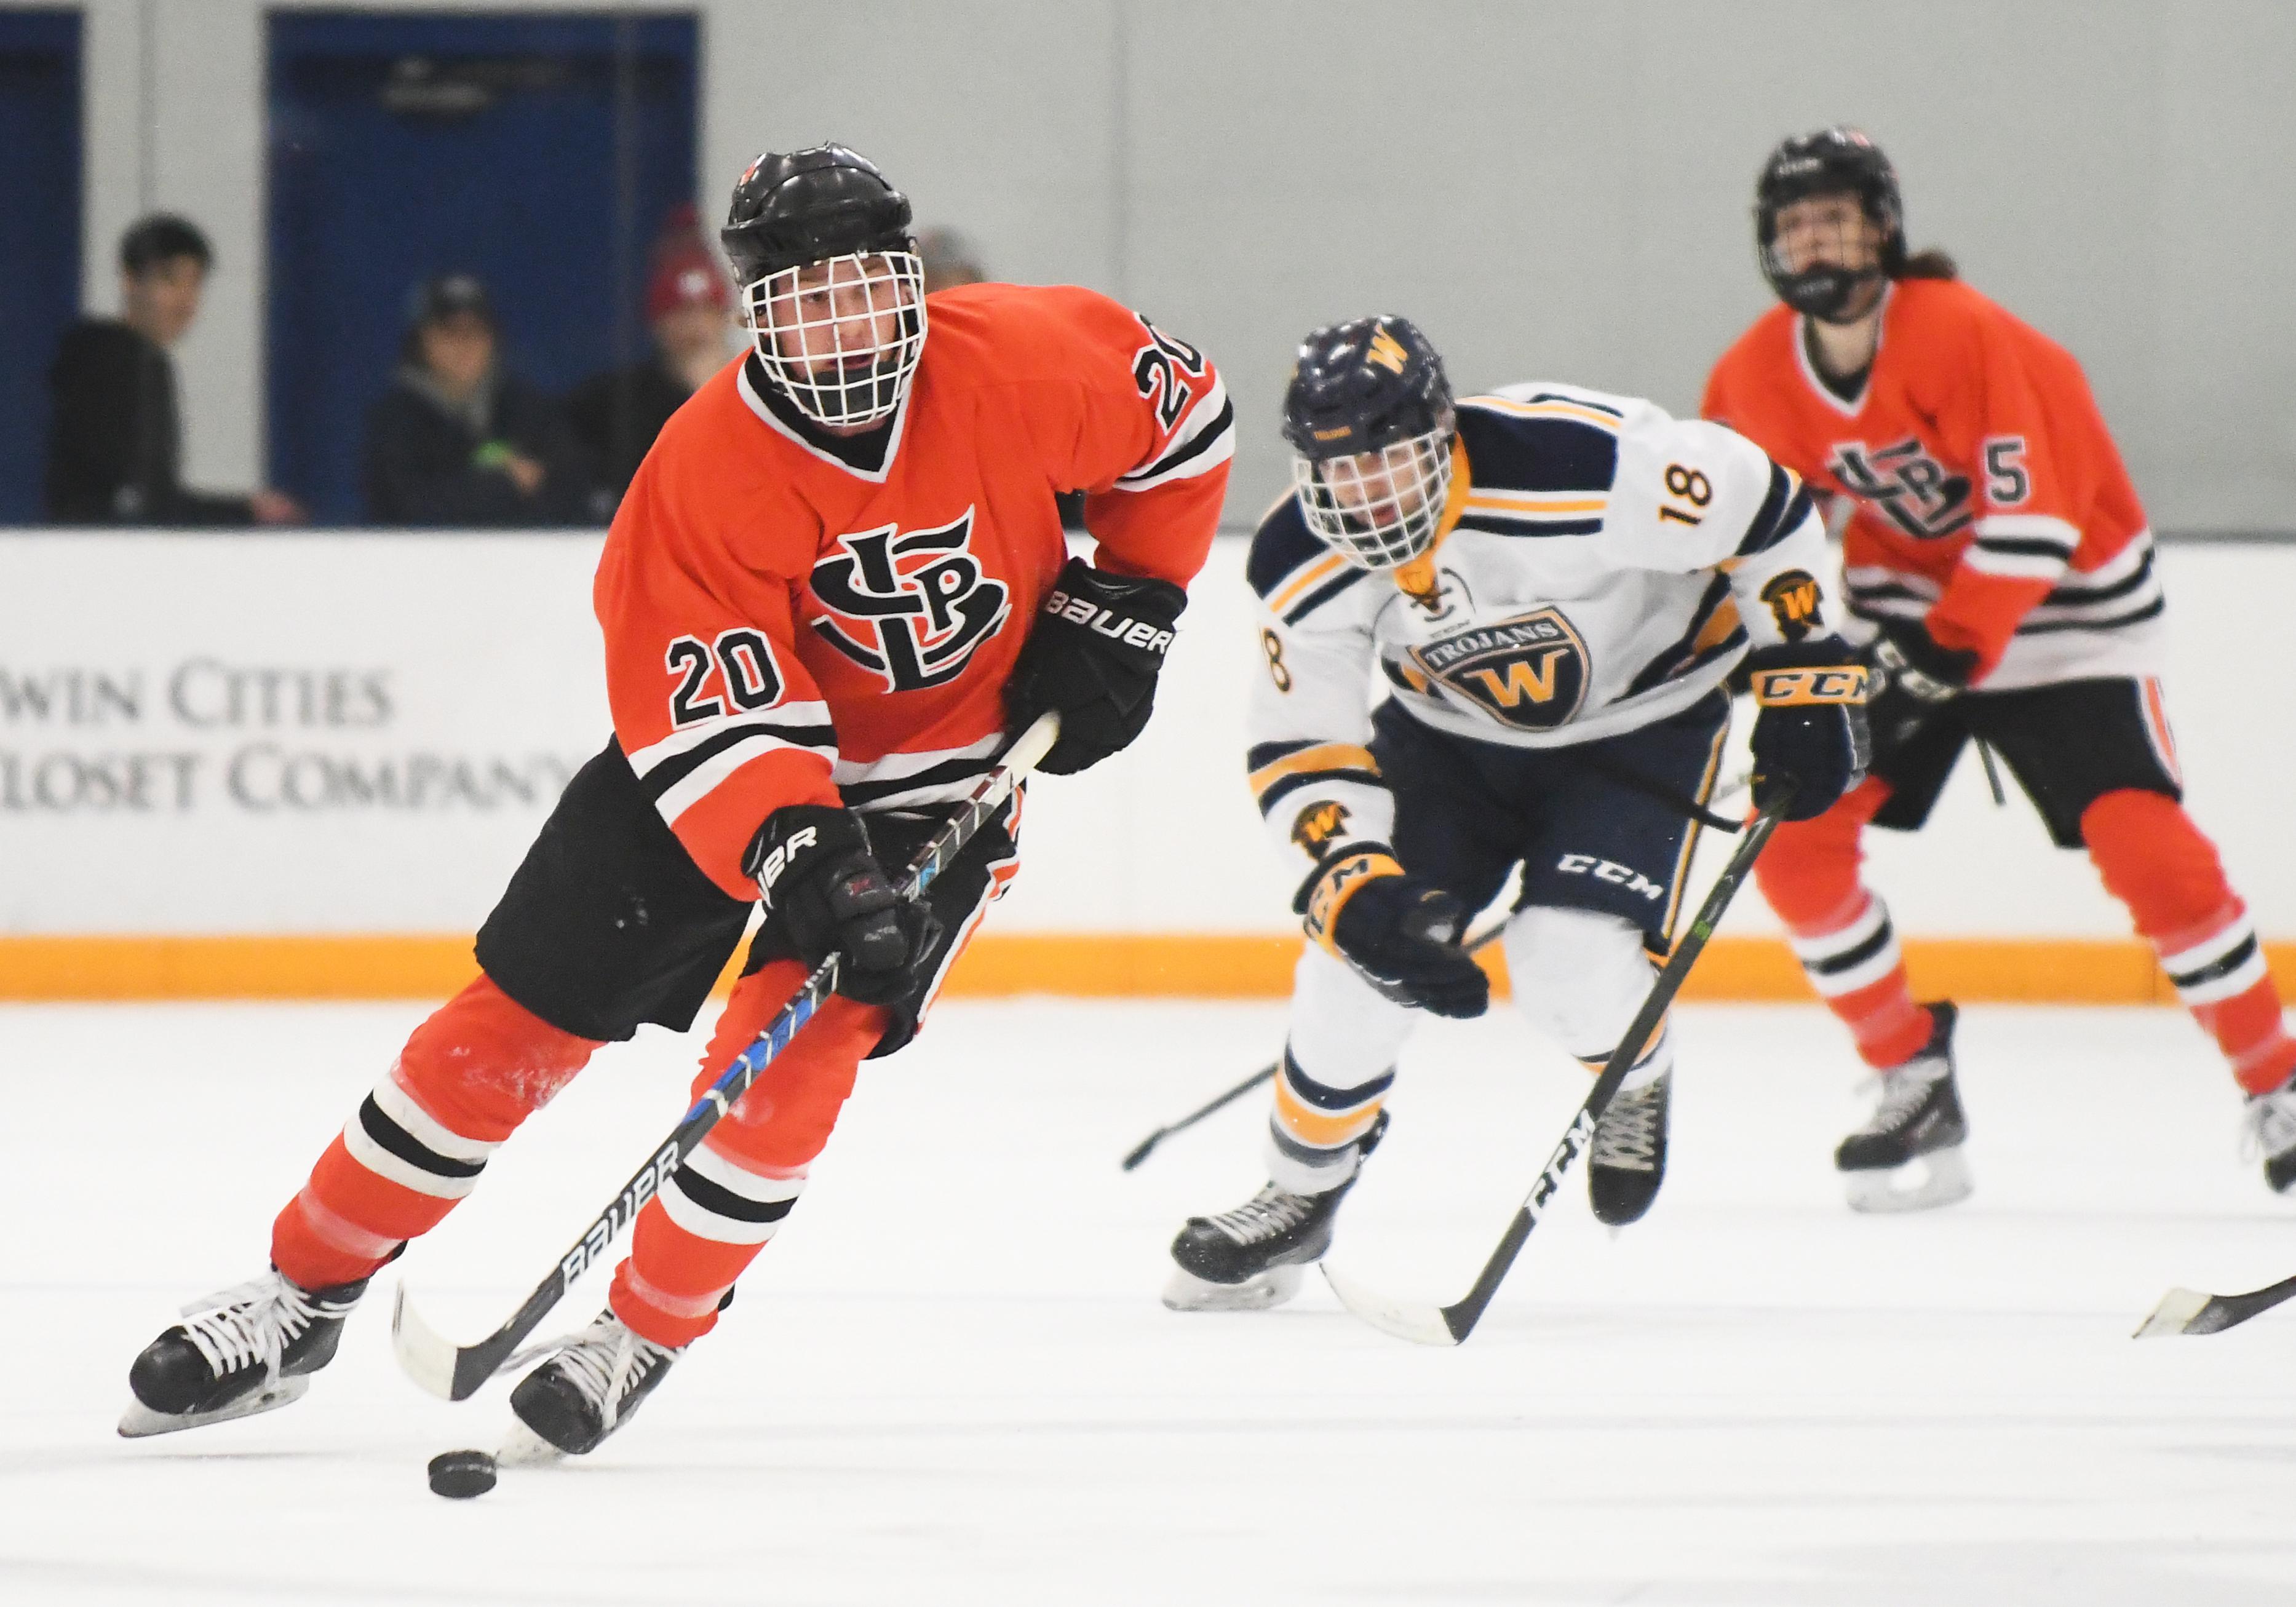 The St. Louis Park boys' hockey team can inch closer to securing its first Metro West Conference title by taking over the first place in the standings